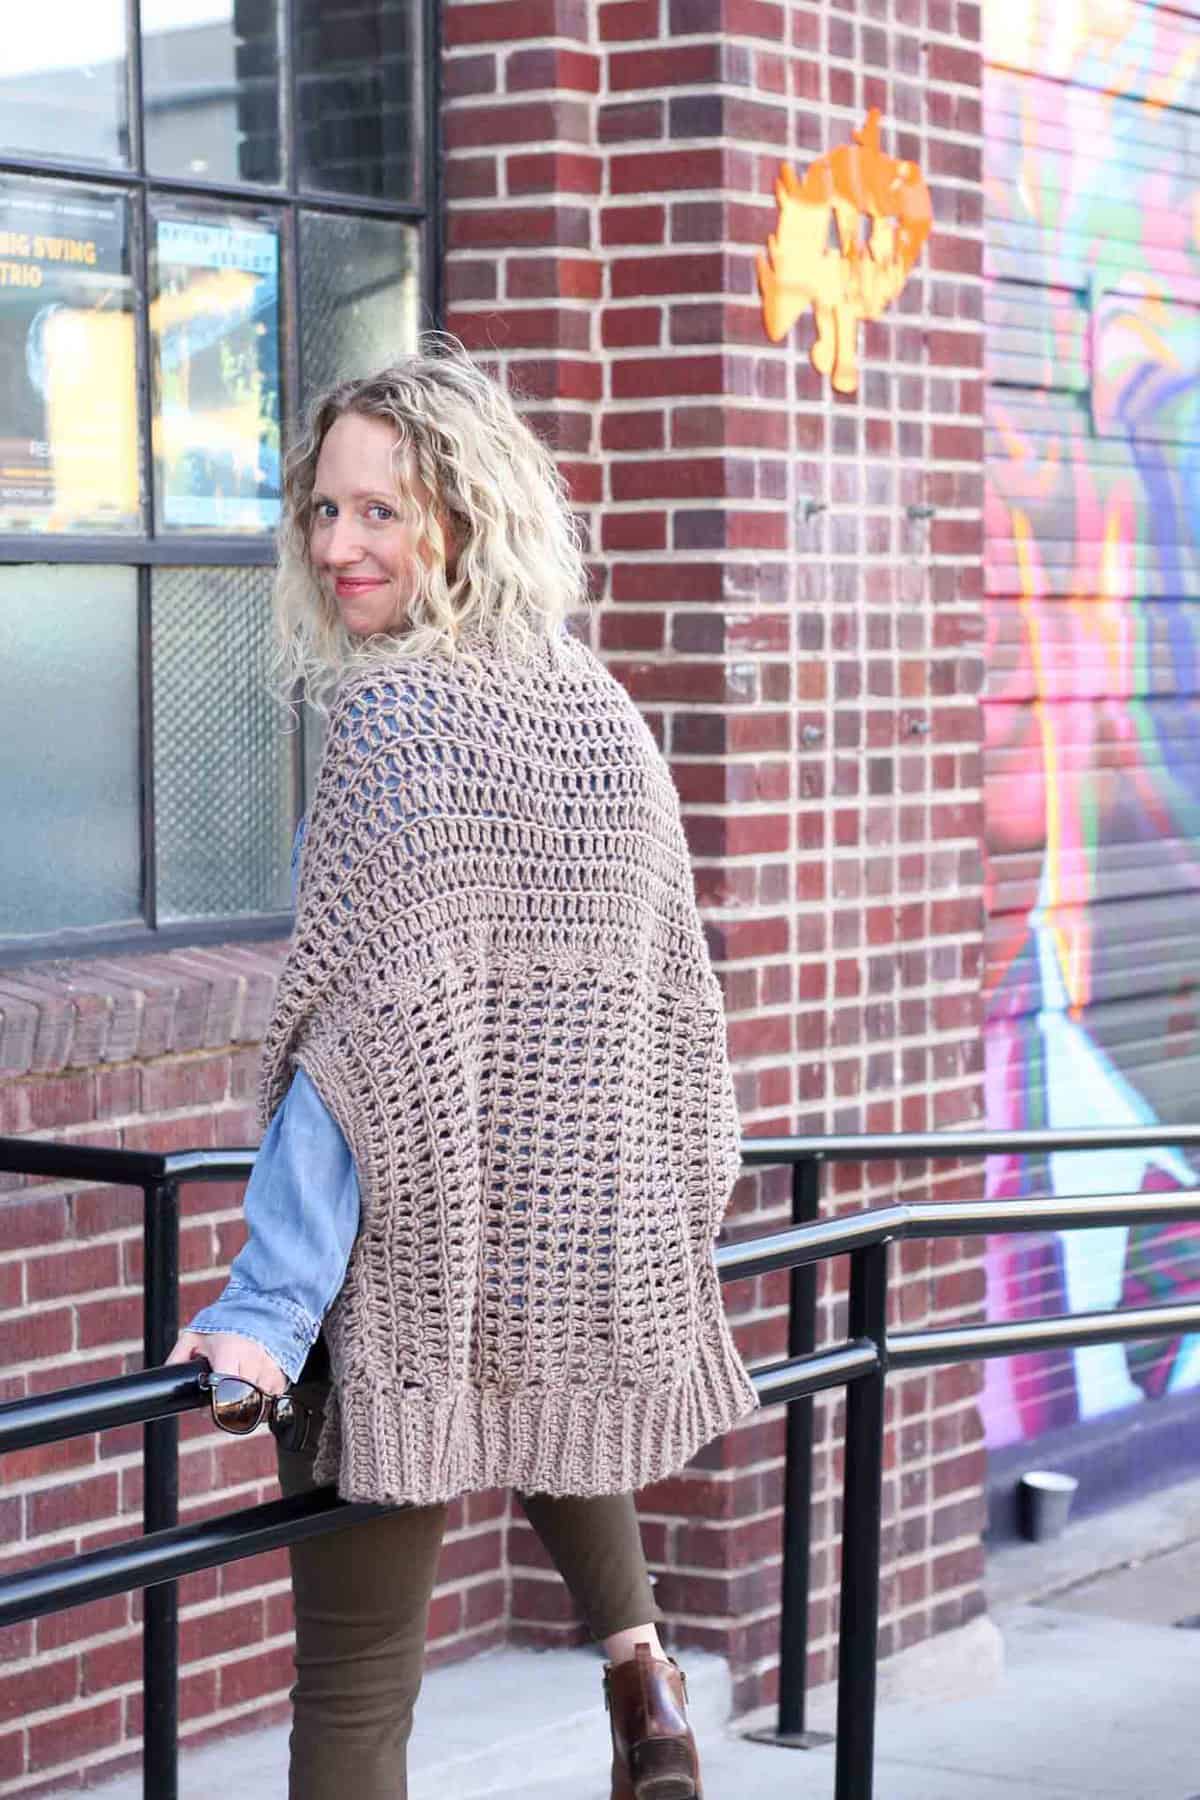 You'd never guess by looking at this sweater that it's made from two simple rectangles! The Cocoon Cardigan free crochet pattern is great for beginners who are looking to expand their skills or advanced crocheters who want a quick, stylish project. Made with Lion Brand Lion's Pride Woolspun yarn in "Taupe." 